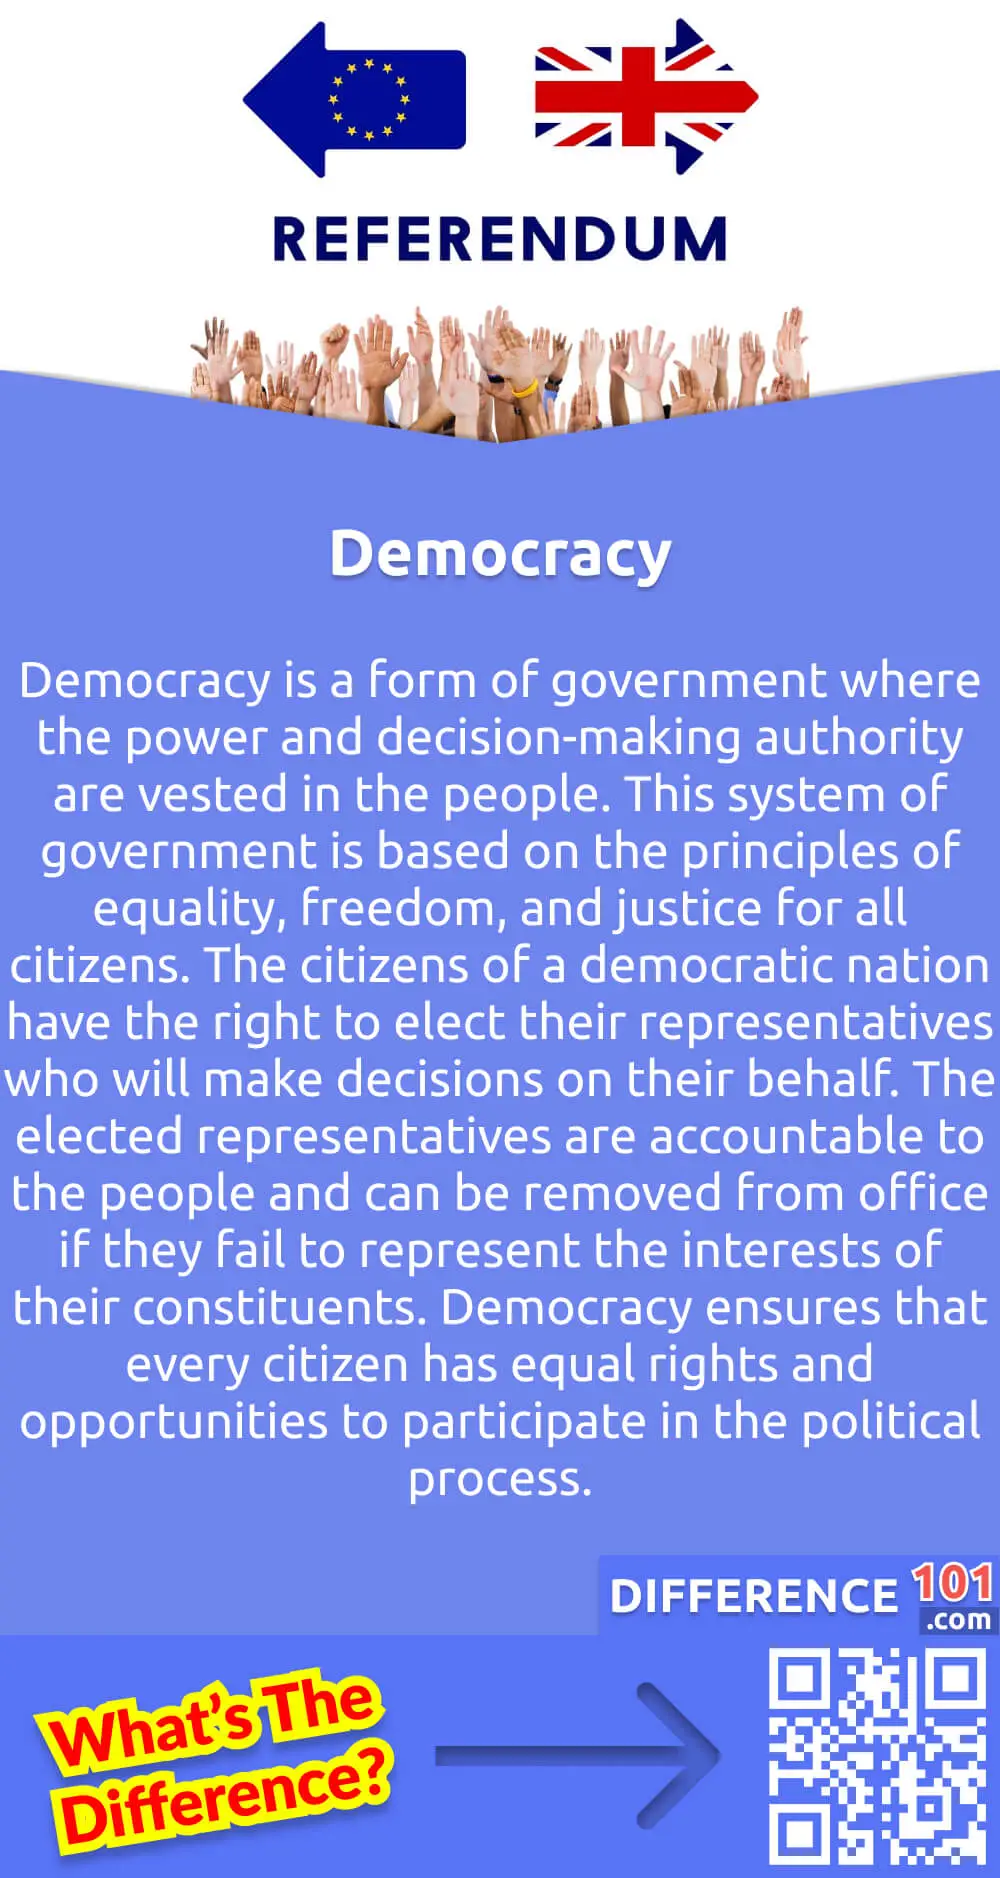 What Is Democracy? Democracy is a form of government where the power and decision-making authority are vested in the people. This system of government is based on the principles of equality, freedom, and justice for all citizens. The citizens of a democratic nation have the right to elect their representatives who will make decisions on their behalf. The elected representatives are accountable to the people and can be removed from office if they fail to represent the interests of their constituents. Democracy ensures that every citizen has equal rights and opportunities to participate in the political process. It is a system that empowers the people and promotes the common good through a fair and transparent process.
